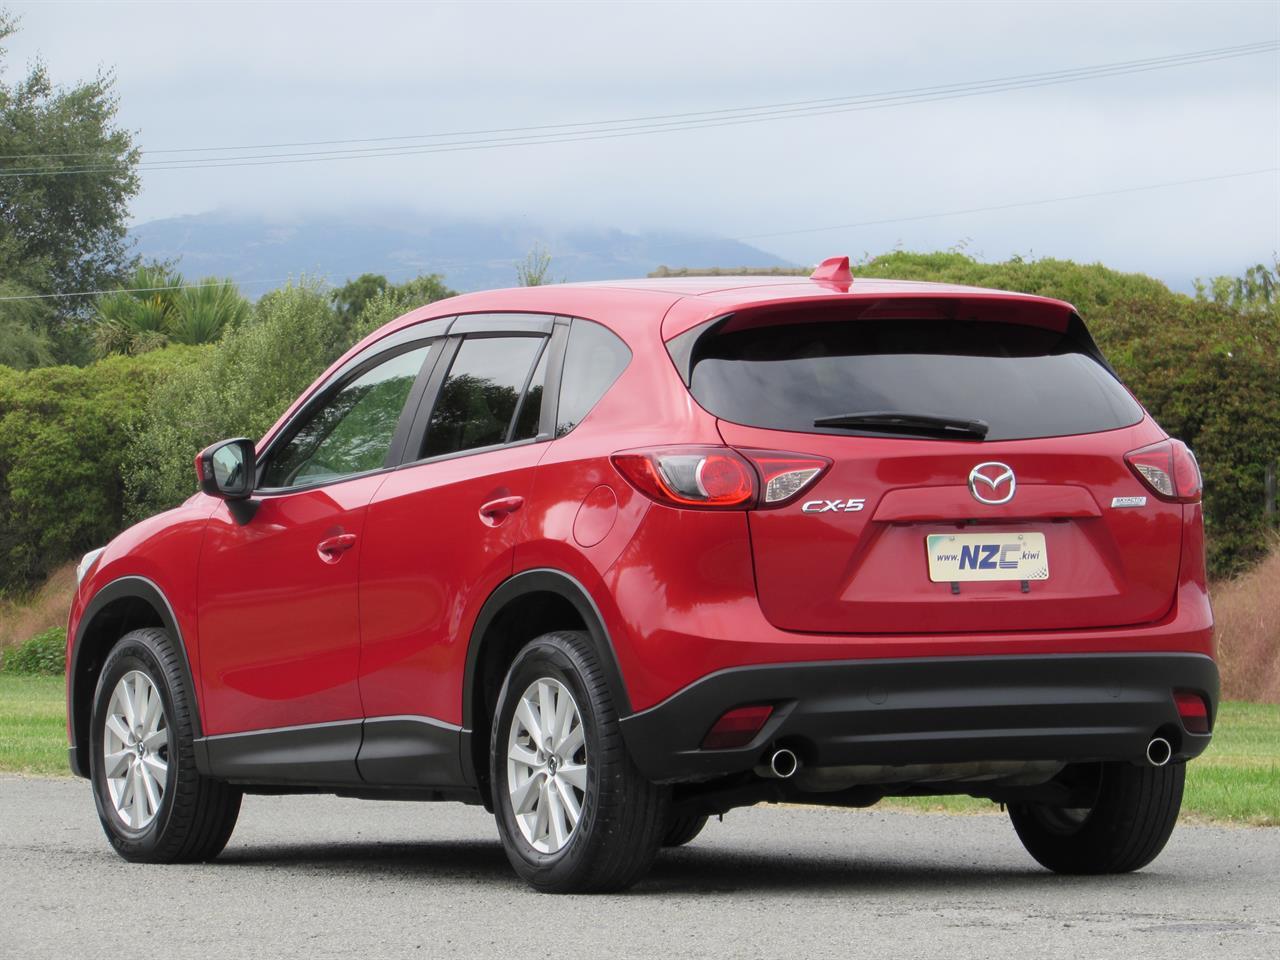 2012 Mazda CX-5 only $78 weekly